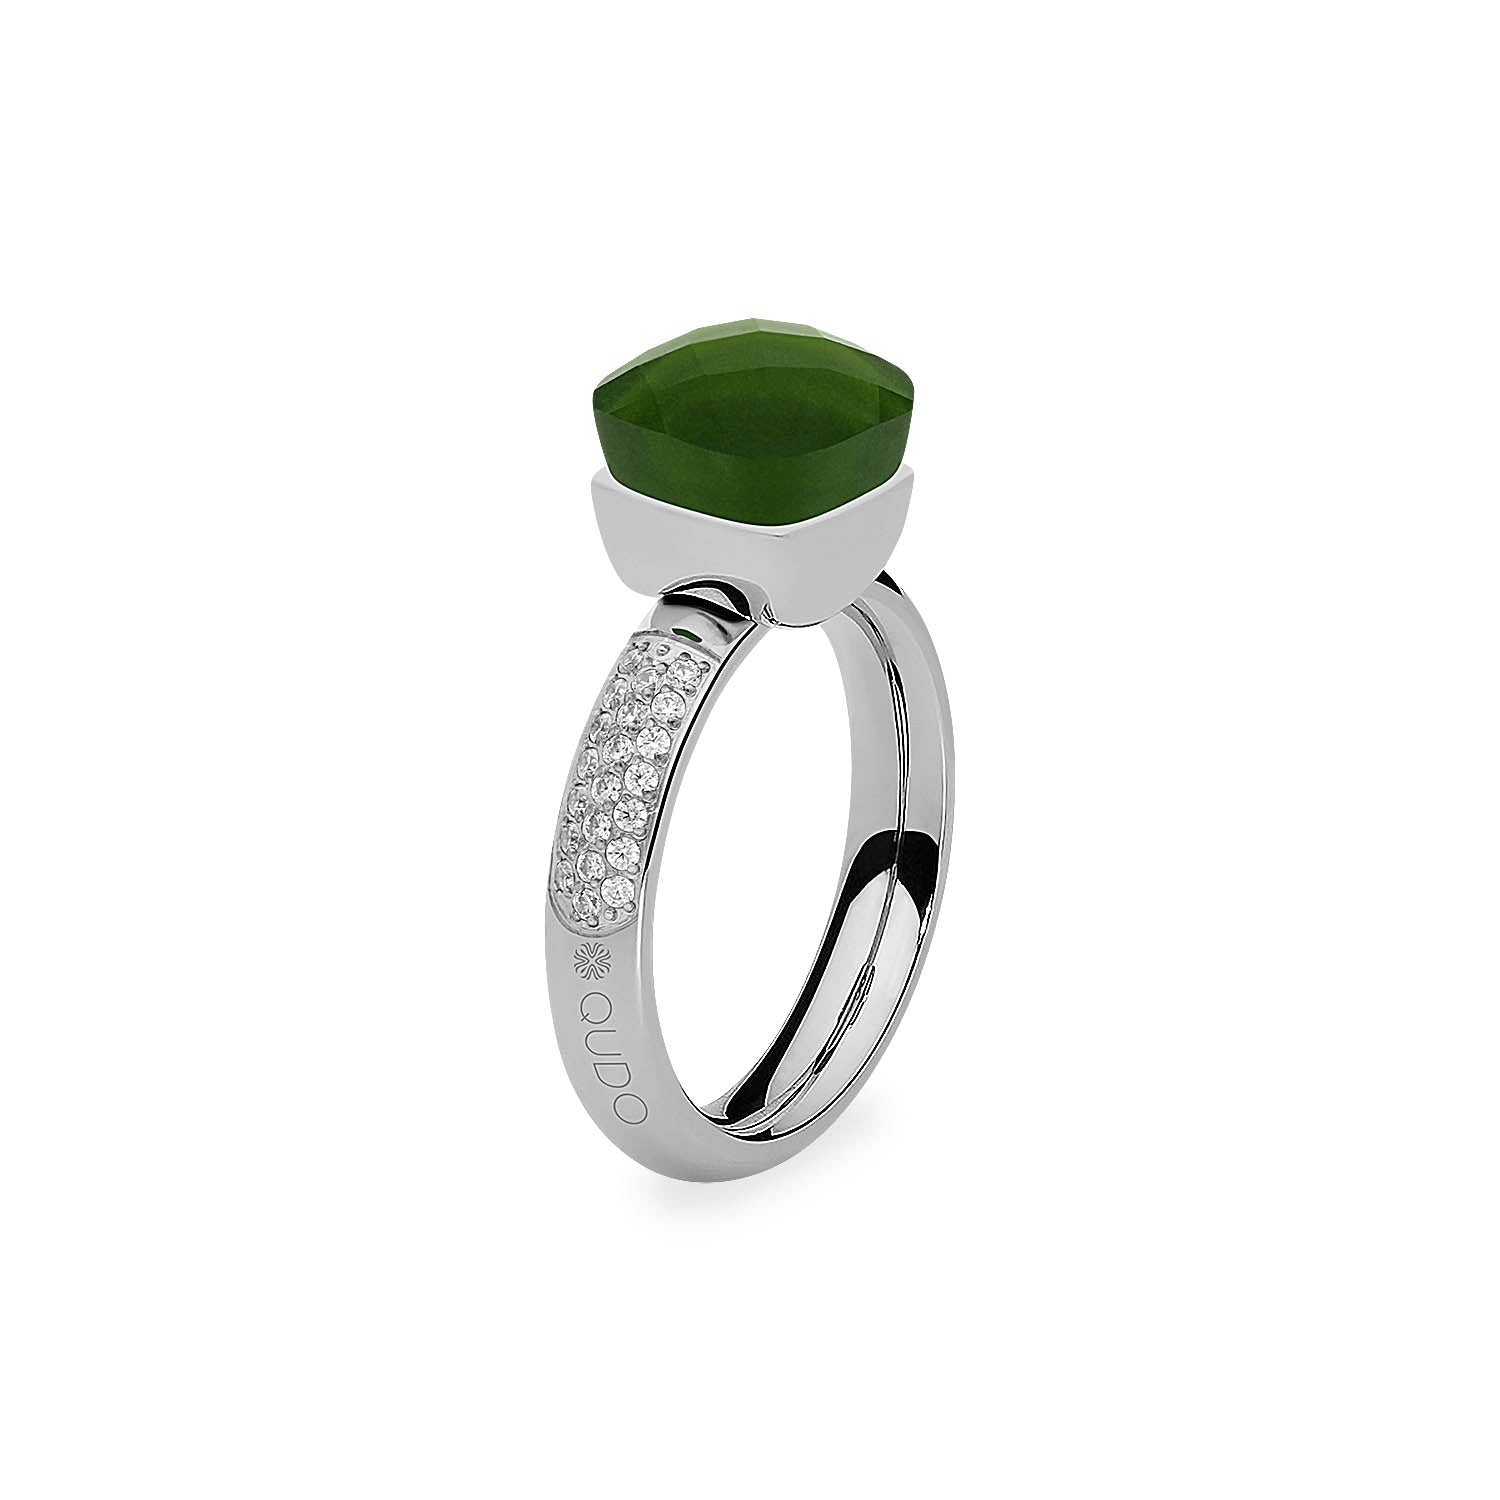 Firenze Deluxe Ring - Shades of Green & Brown - Silver